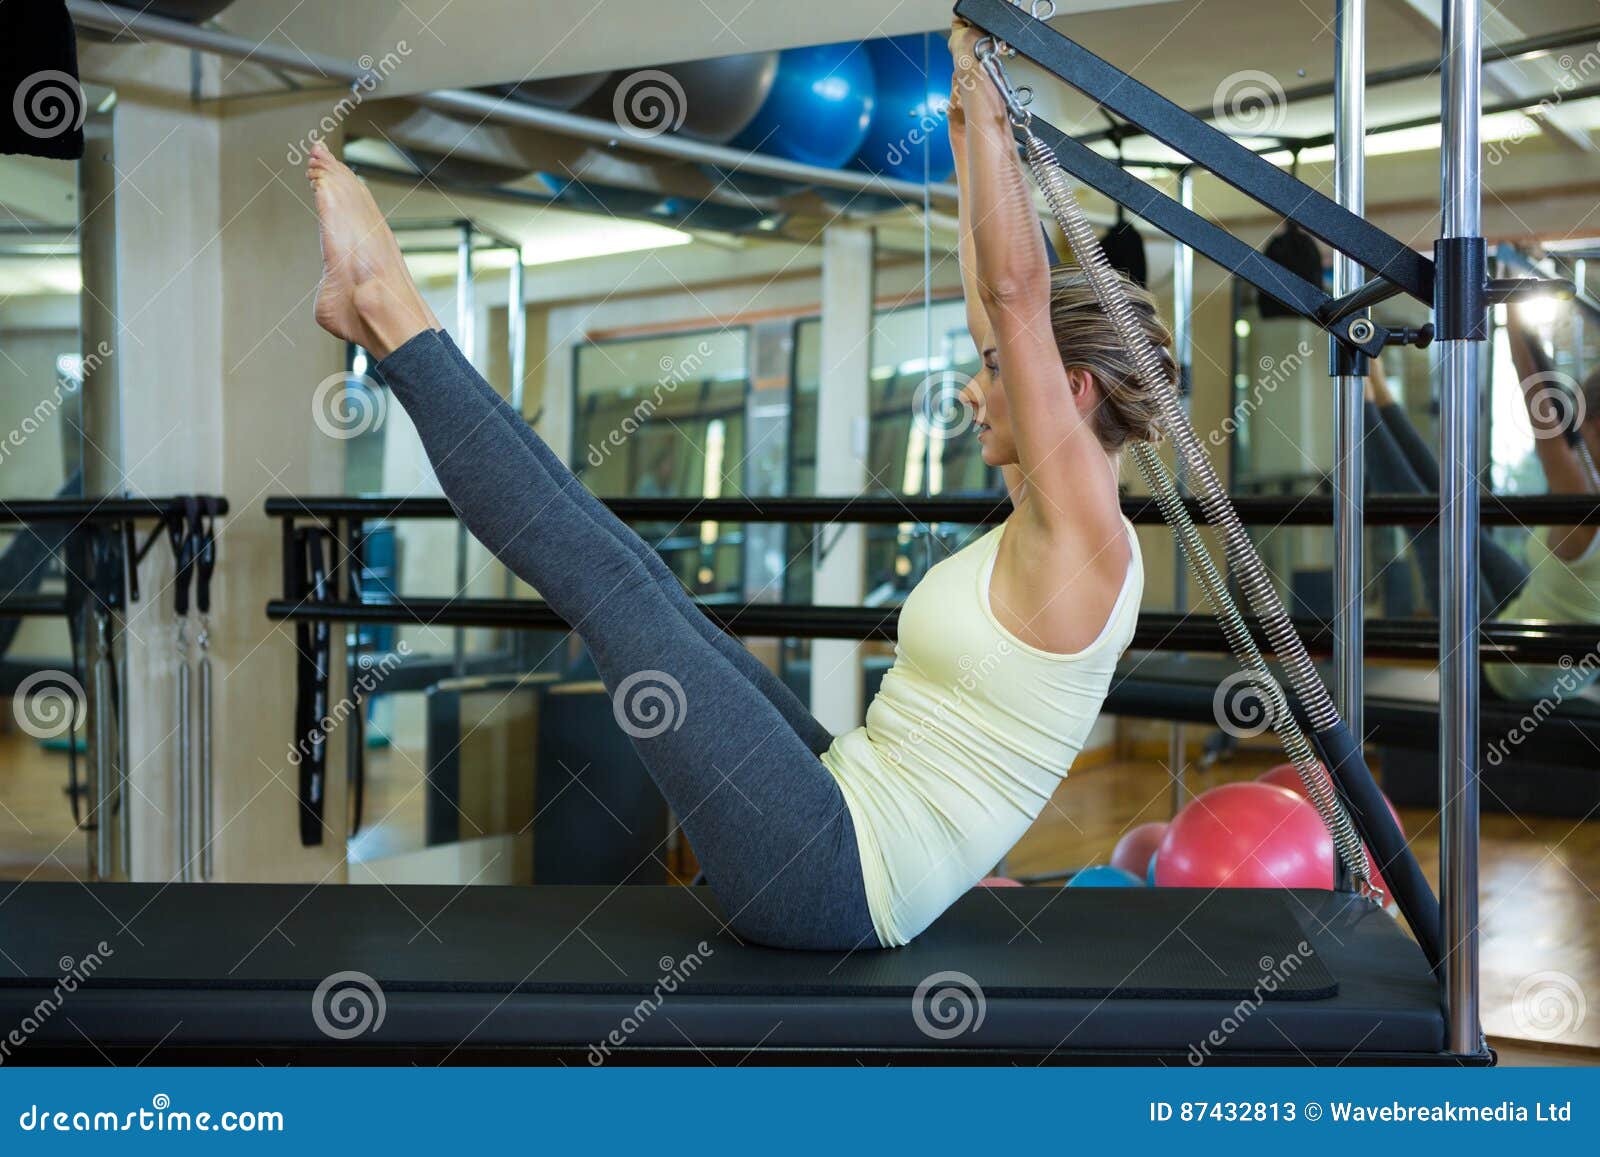 Determined Woman Performing Stretching Exercise on Reformer Stock Image ...